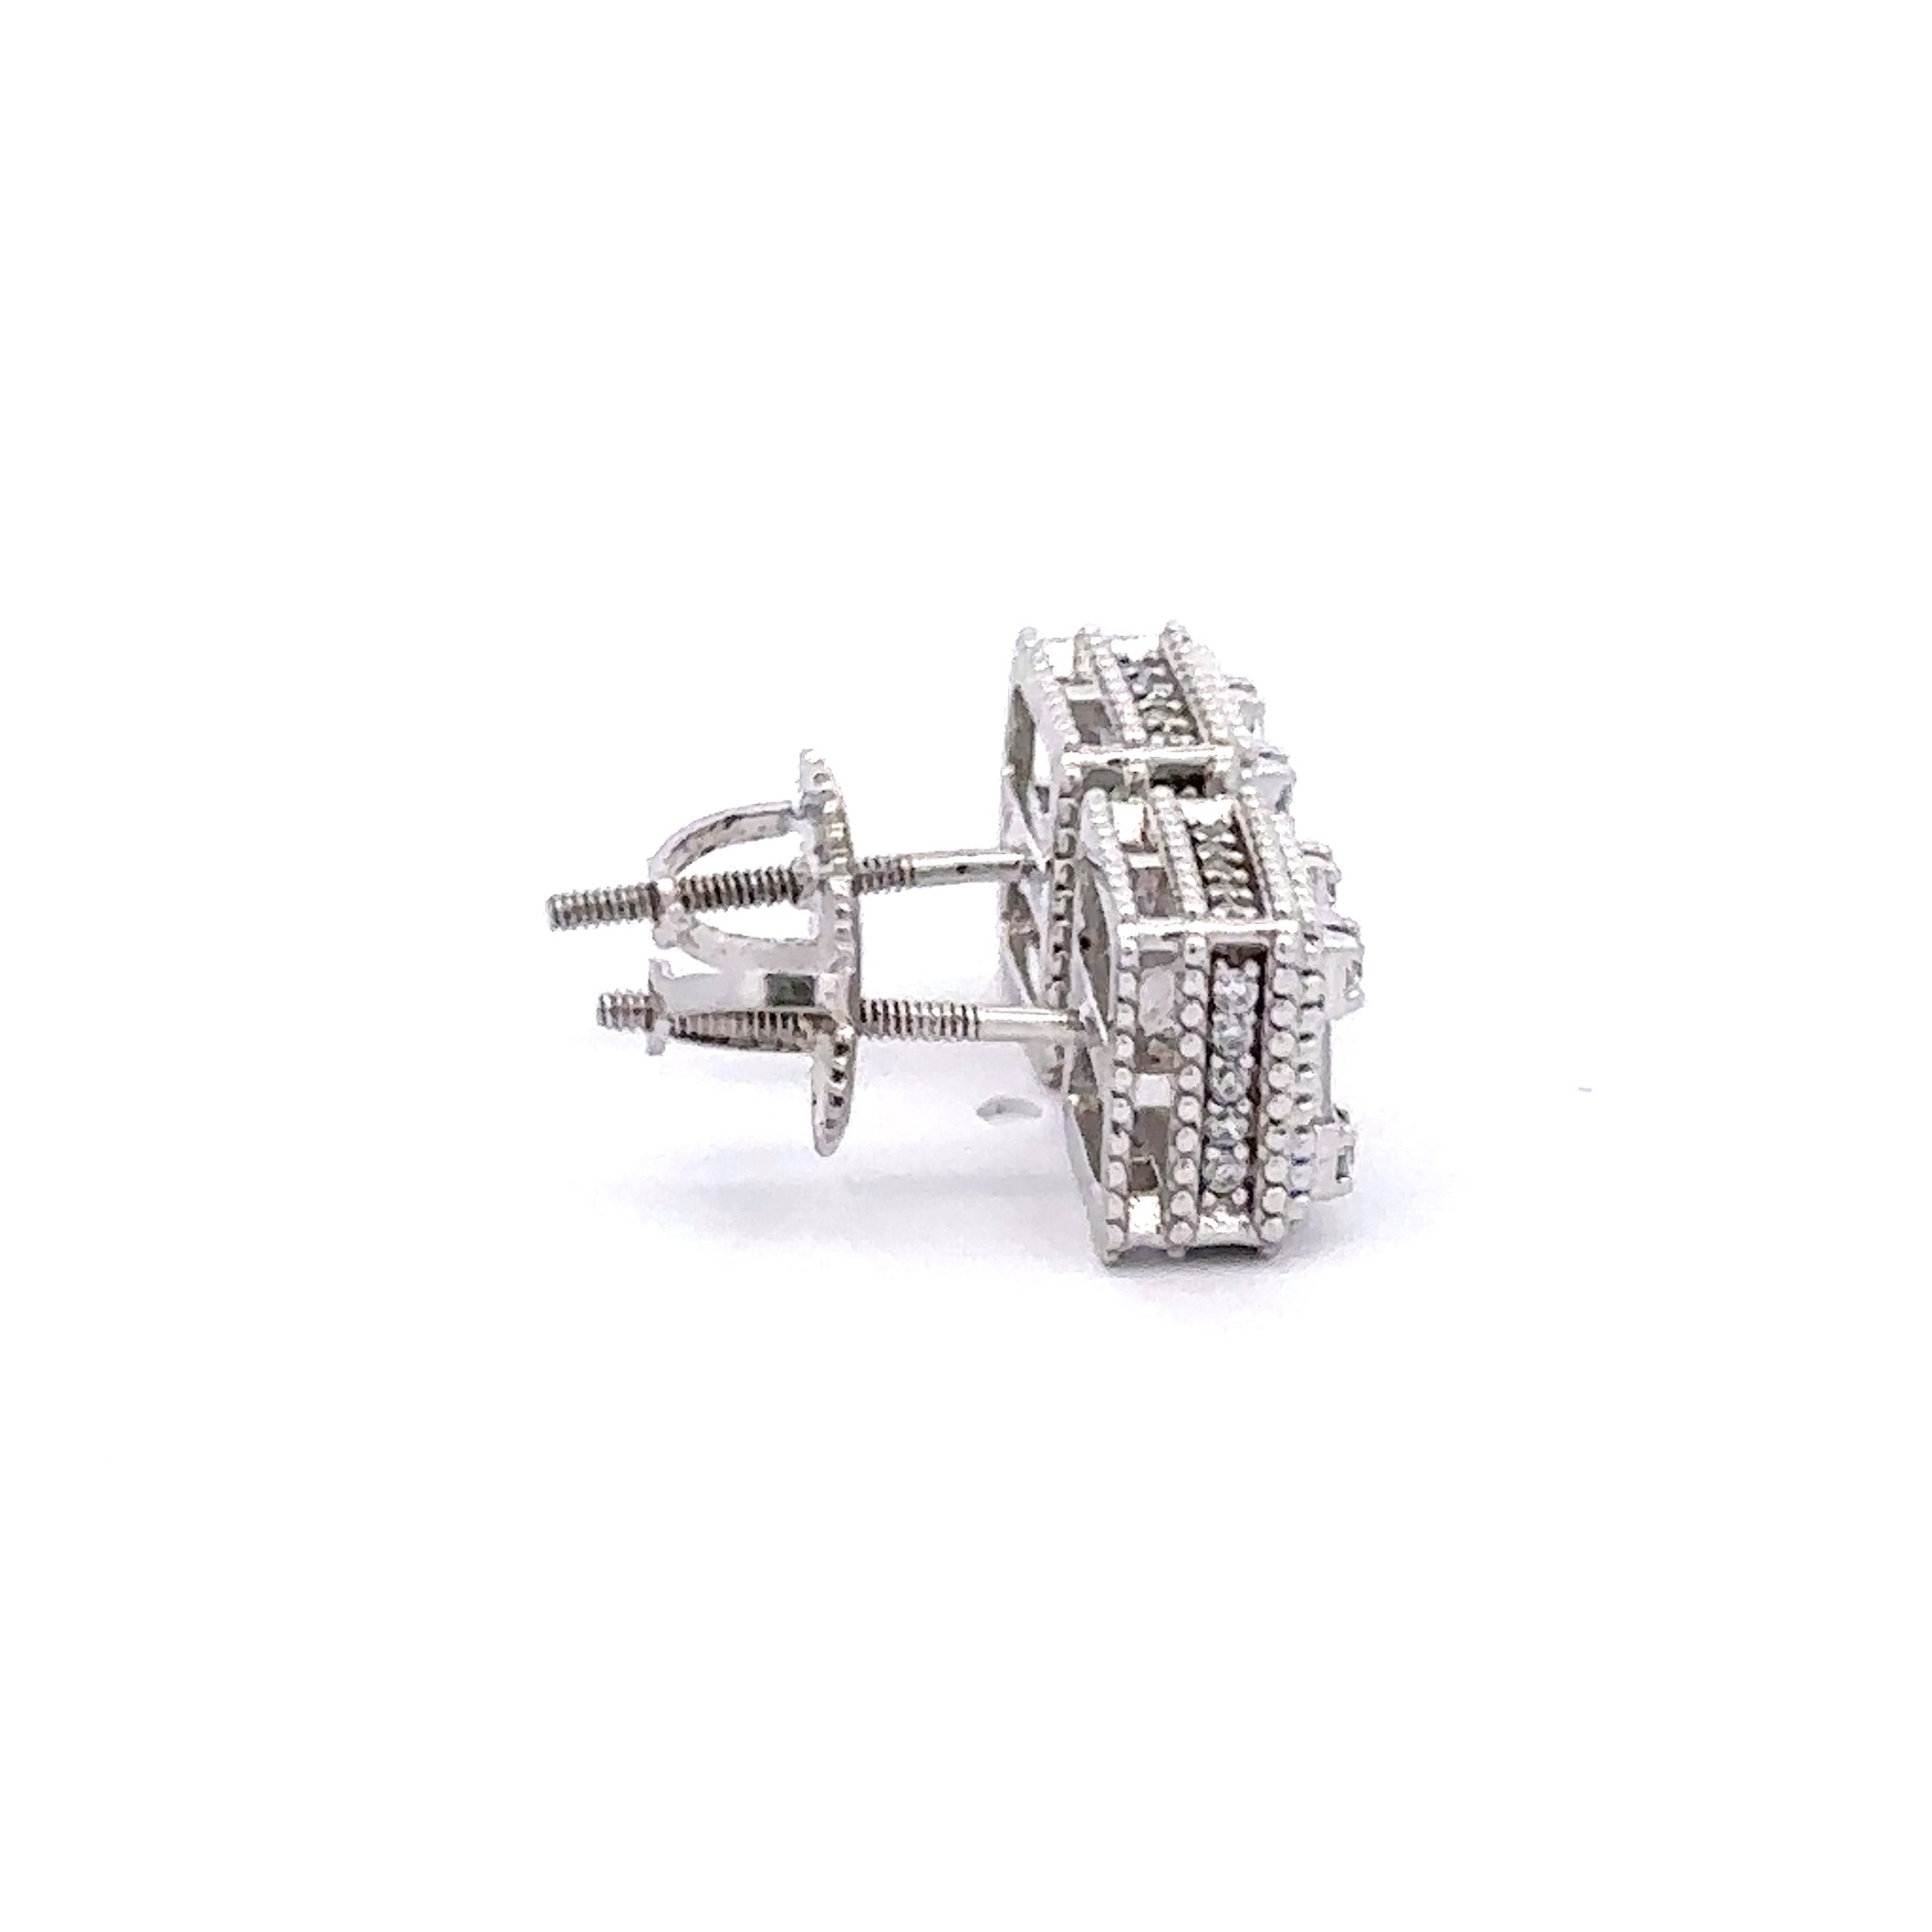 NYXARIS 925 CZ RHODIUM ICED OUT EARRINGS | 9219691